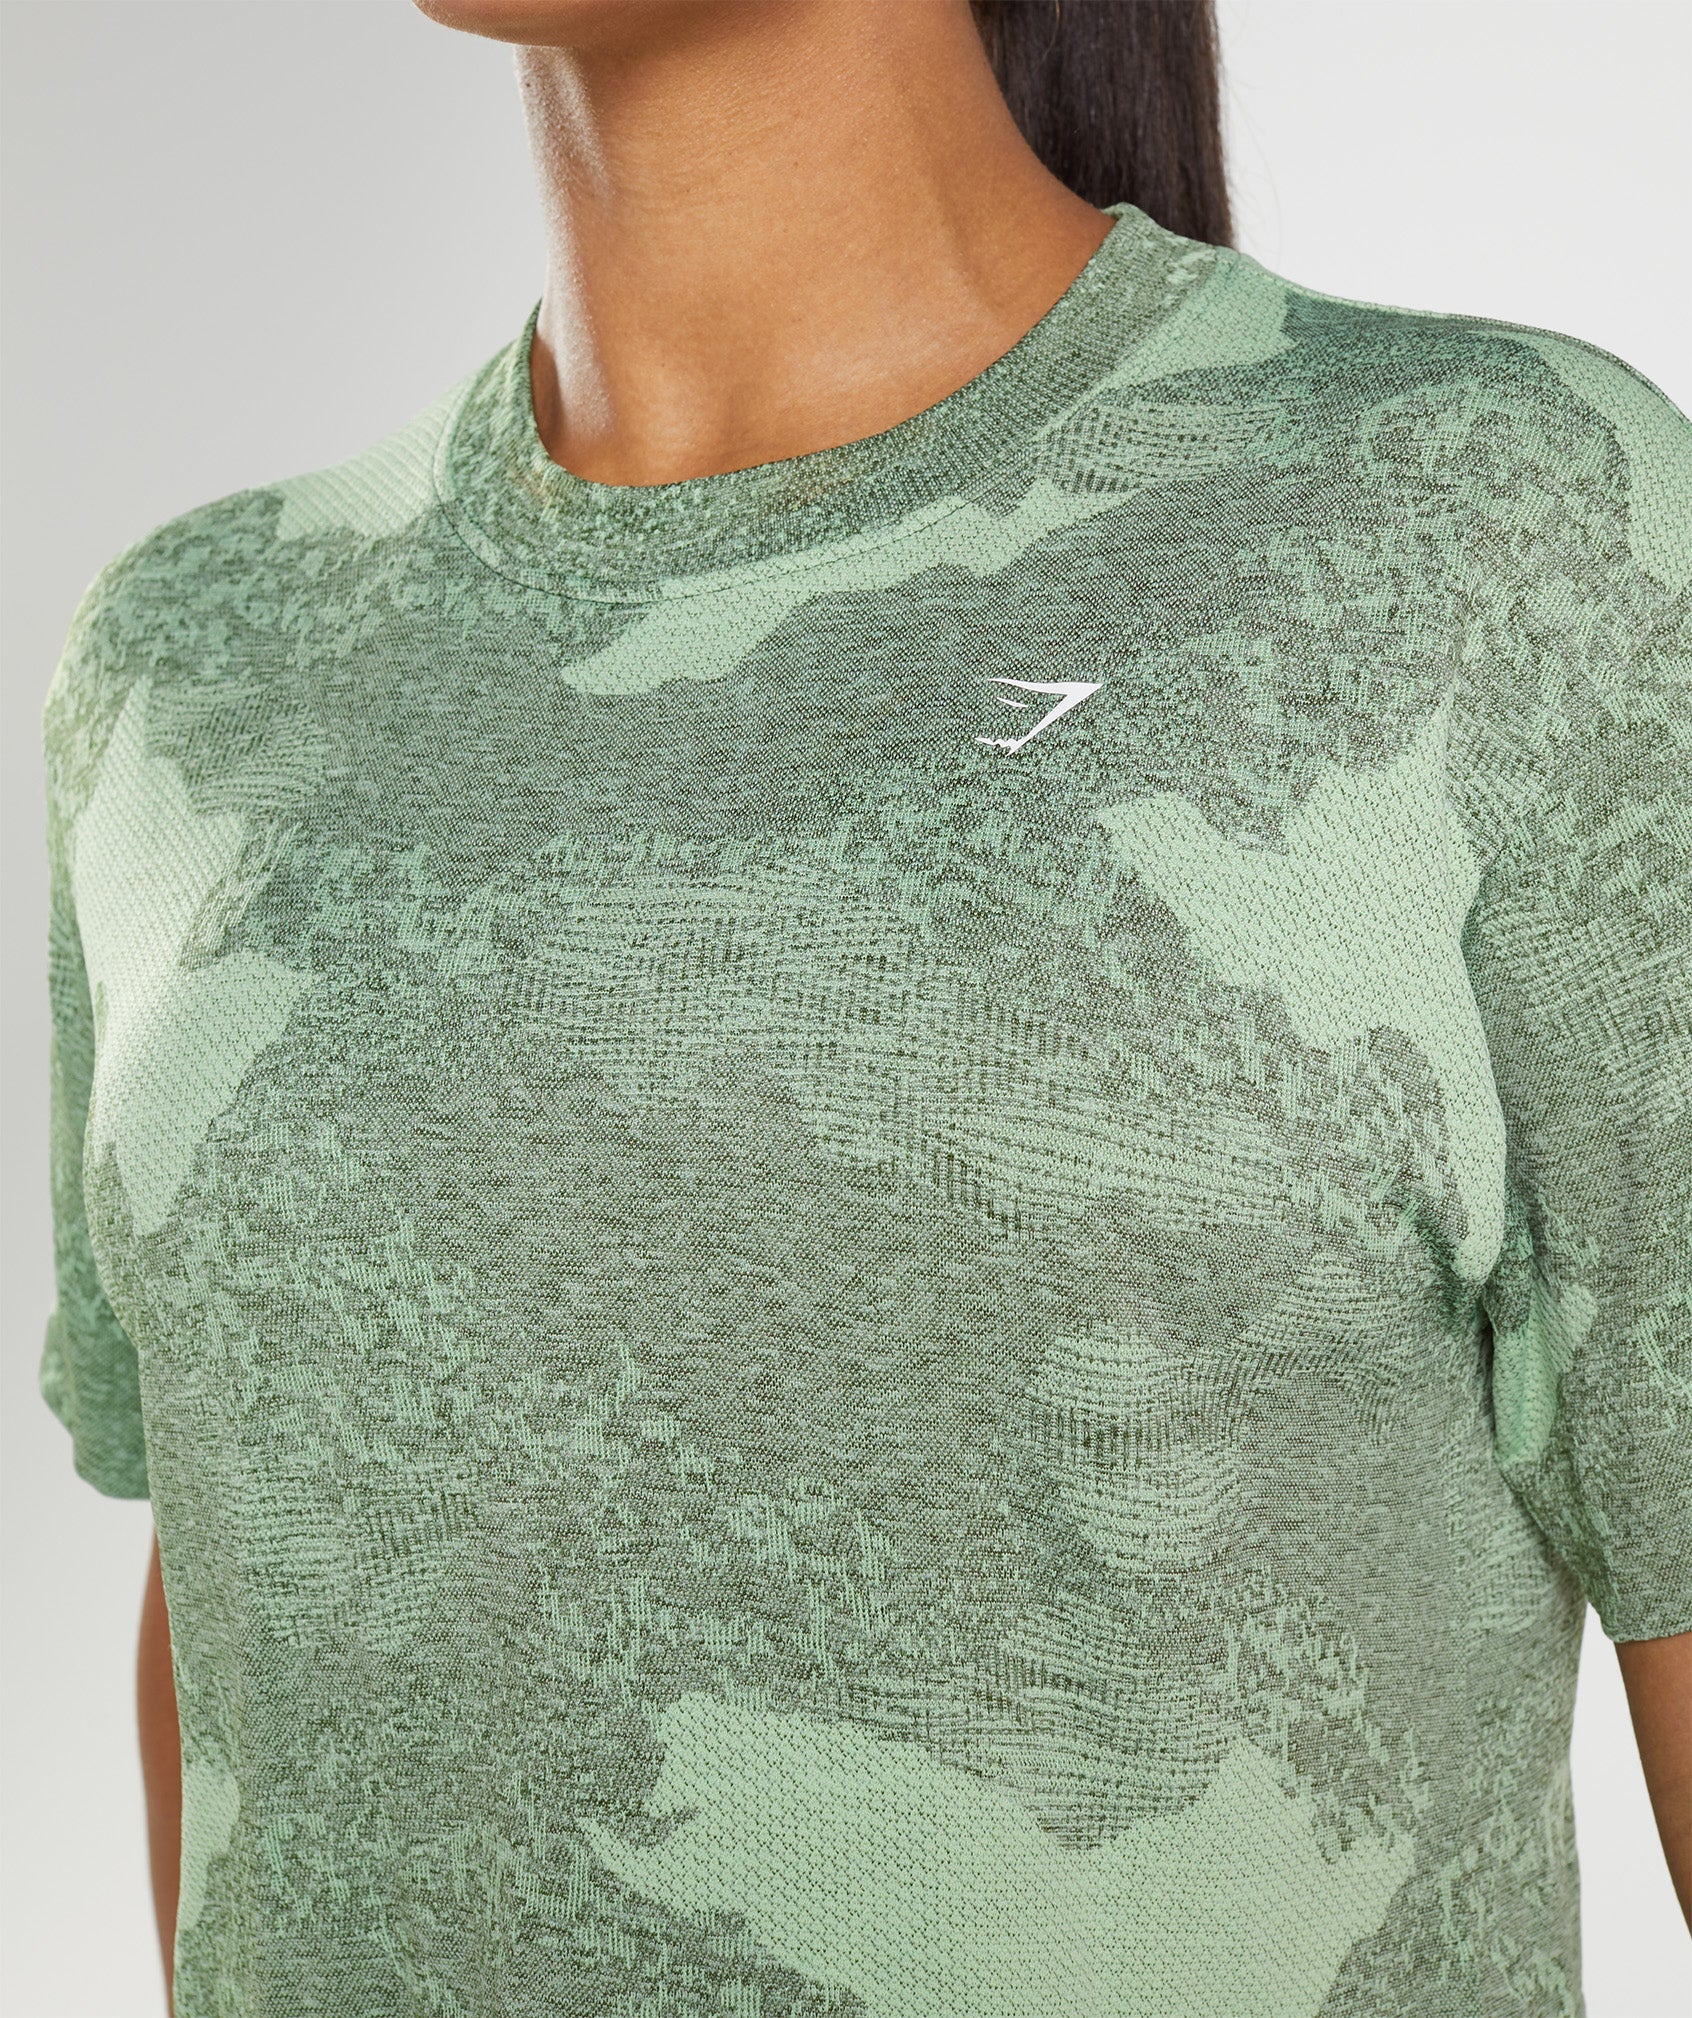 Adapt Camo Seamless Crop Top in Aloe Green/Moss Olive - view 6